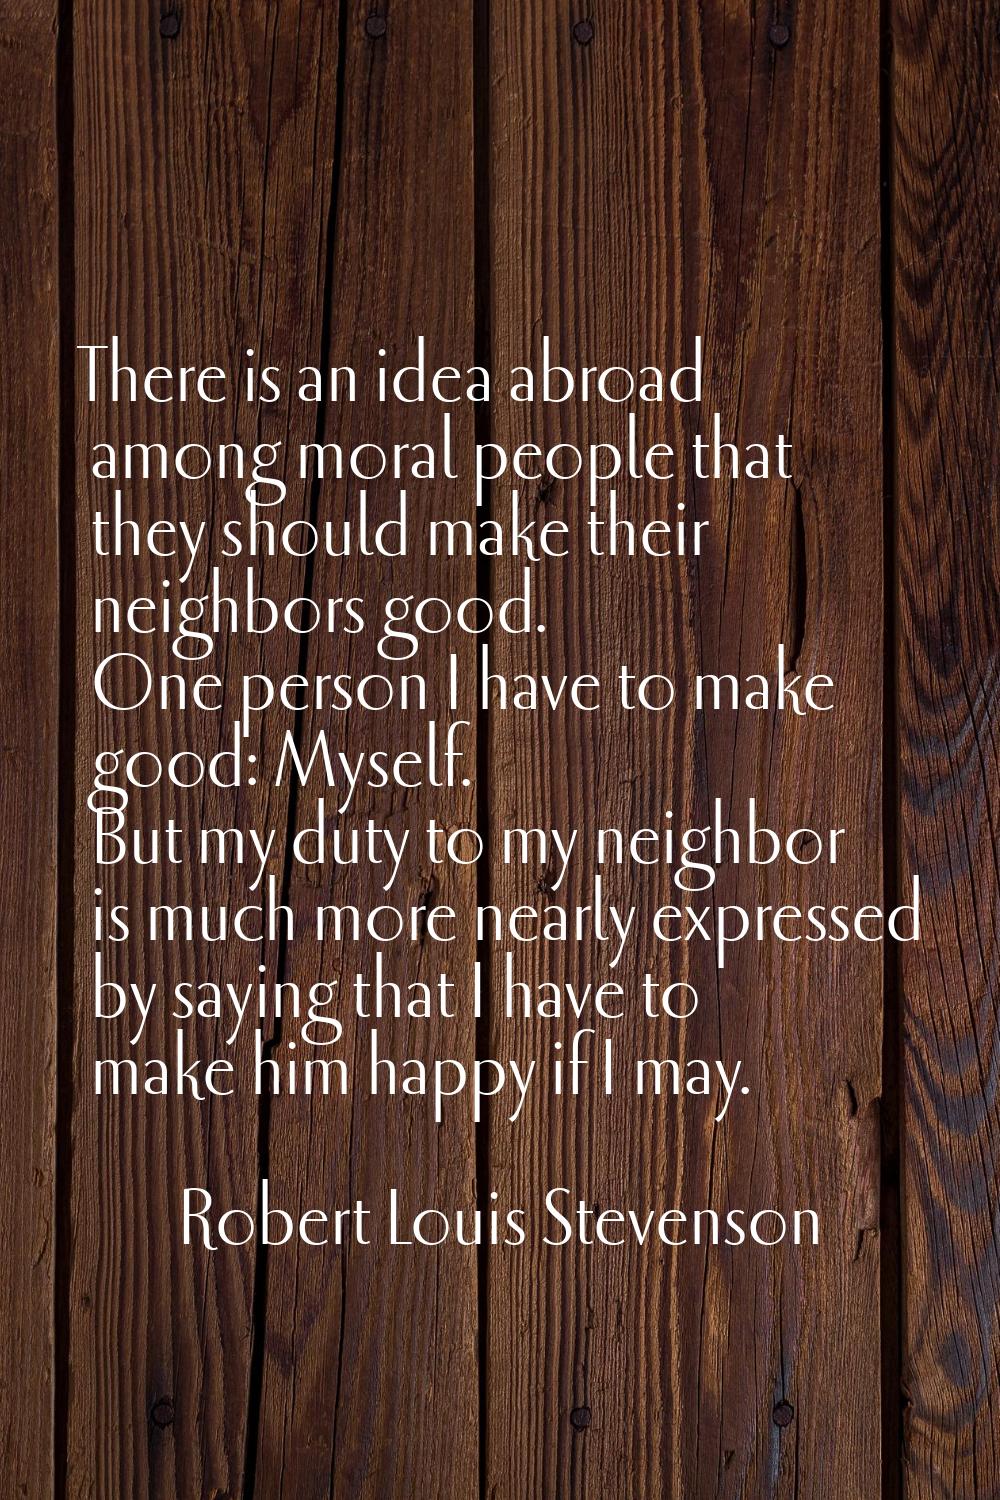 There is an idea abroad among moral people that they should make their neighbors good. One person I